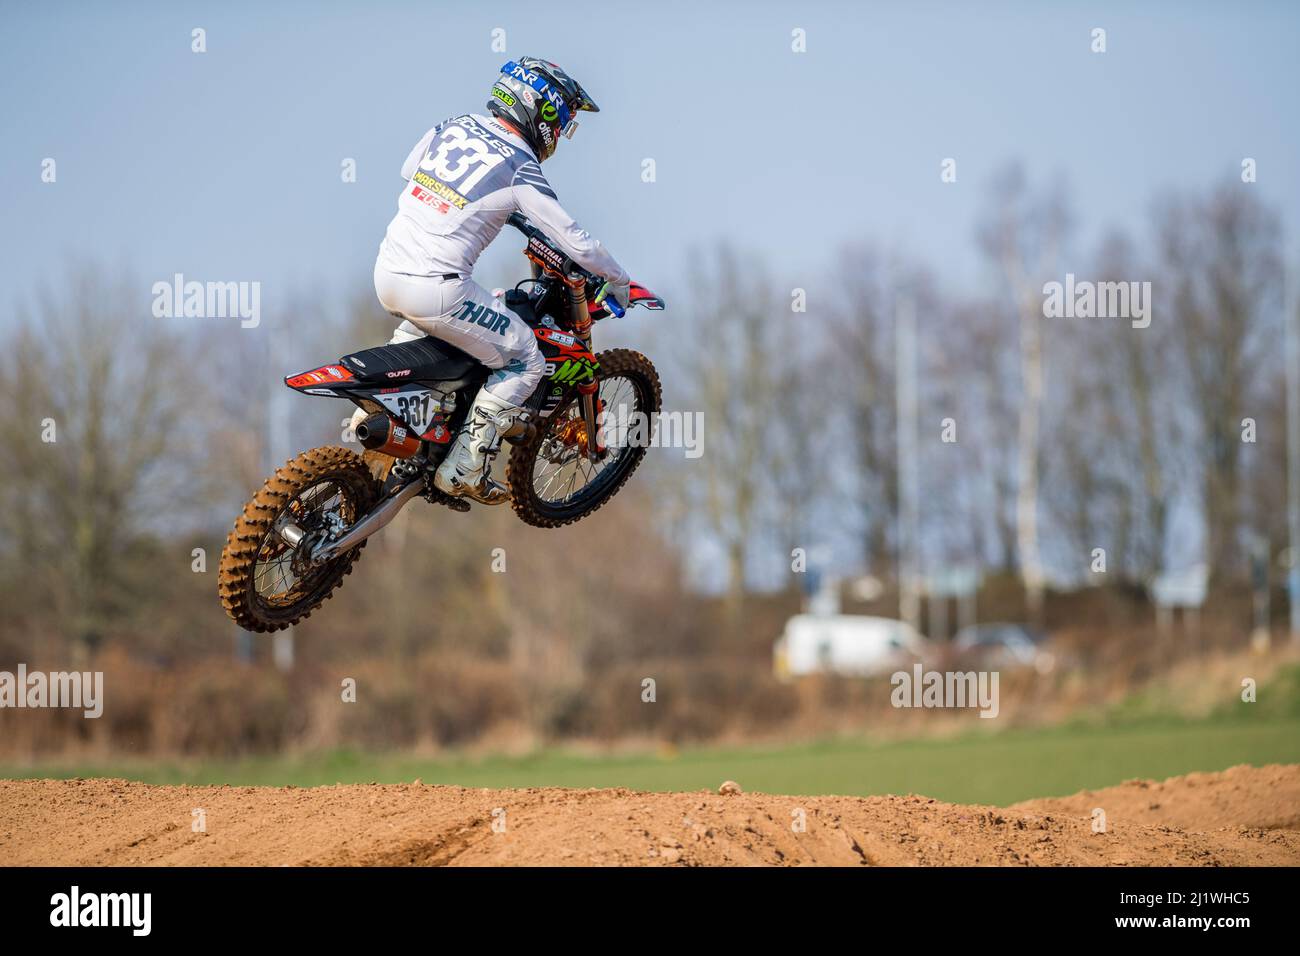 National Motocross sporting event. Stock Photo